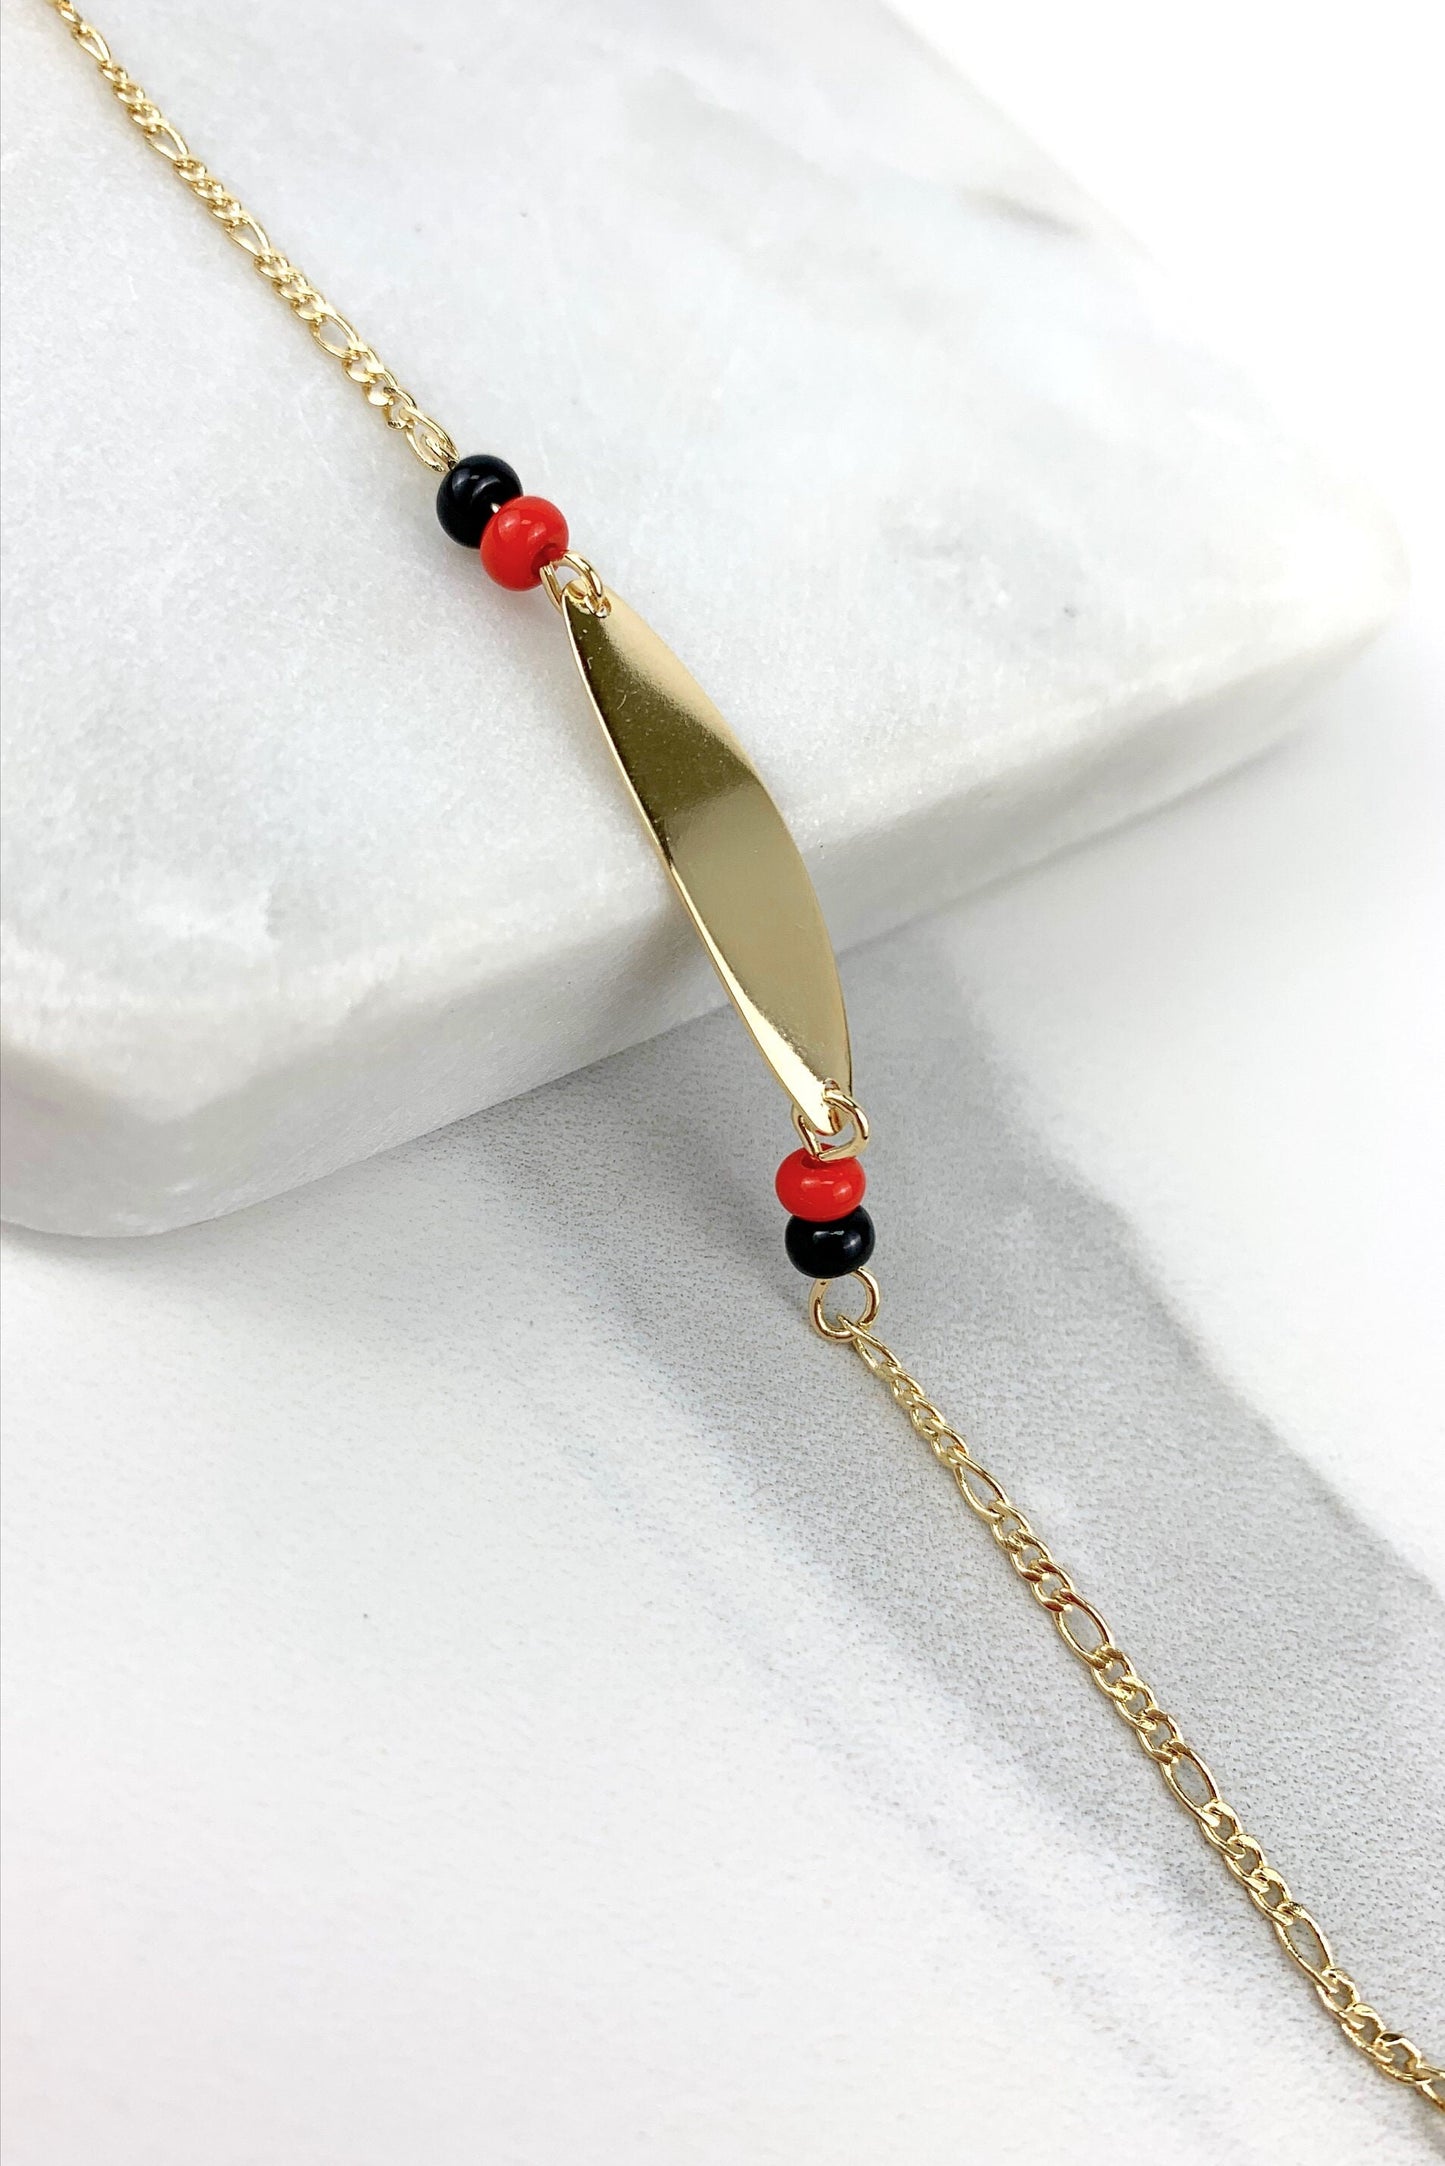 Mommy and Me Matching Jewelry | 18k Gold Filled Figaro Link Id Kids Bracelet or Black Red Beads Mother Bracelet Wholesale Jewelry Supplies